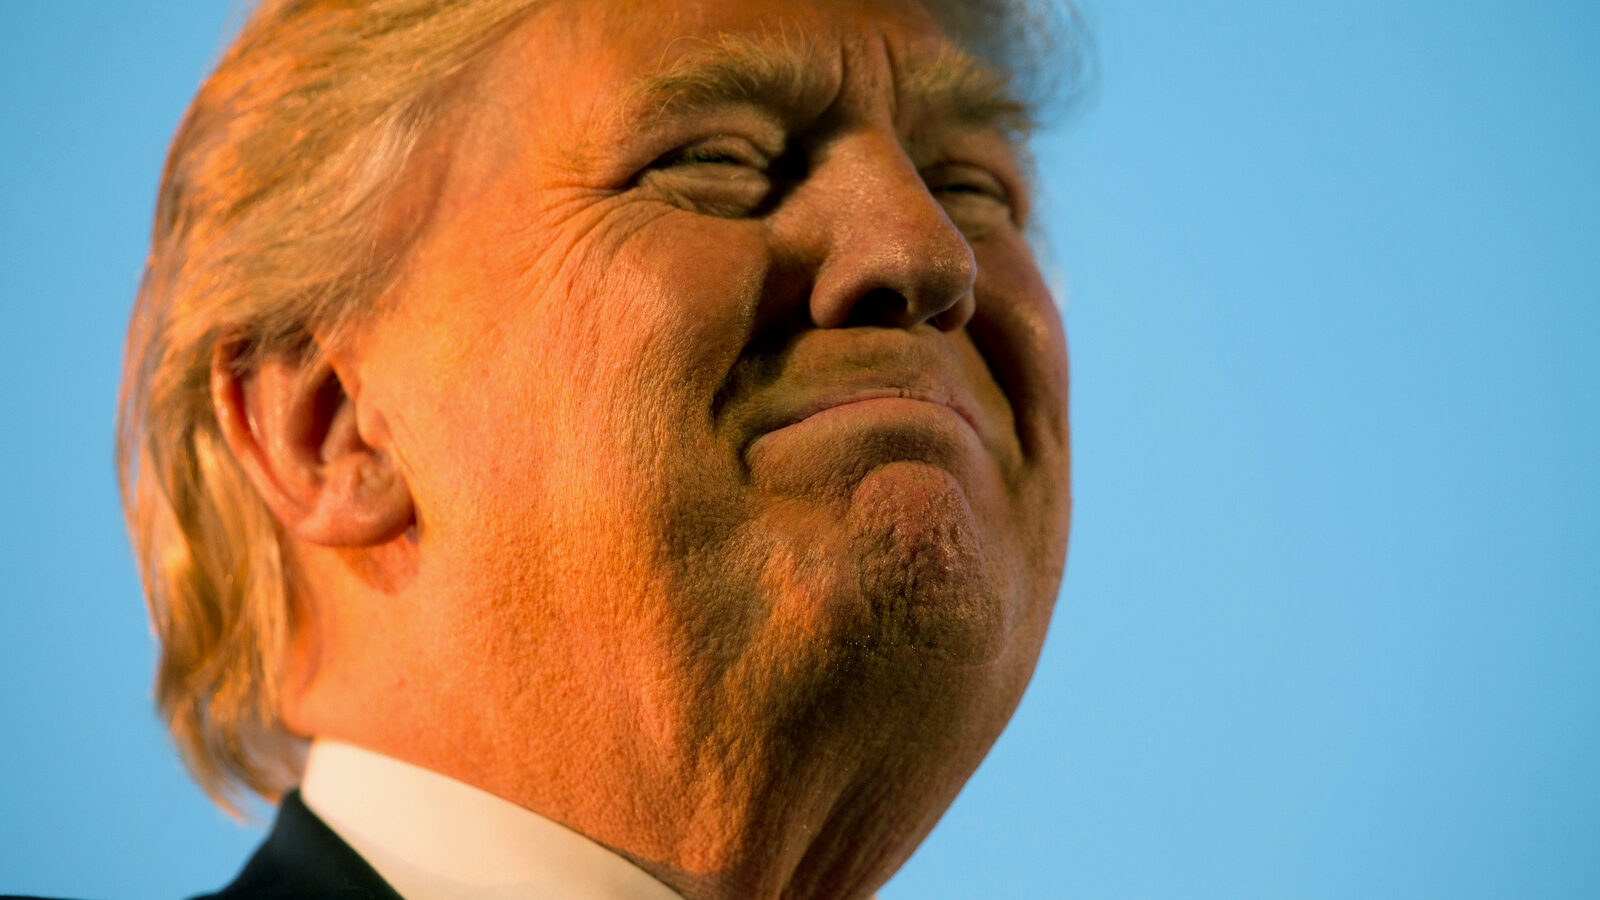 Republican presidential candidate Donald Trump pauses during while speaking at a rally in Millington, Tenn. Tough talk about torture is a guaranteed applause line for Donald Trump on the GOP presidential stump. Trump has repeatedly advocated waterboarding, an enhanced interrogation technique that simulates the feeling of drowning. (AP/Andrew Harnik)